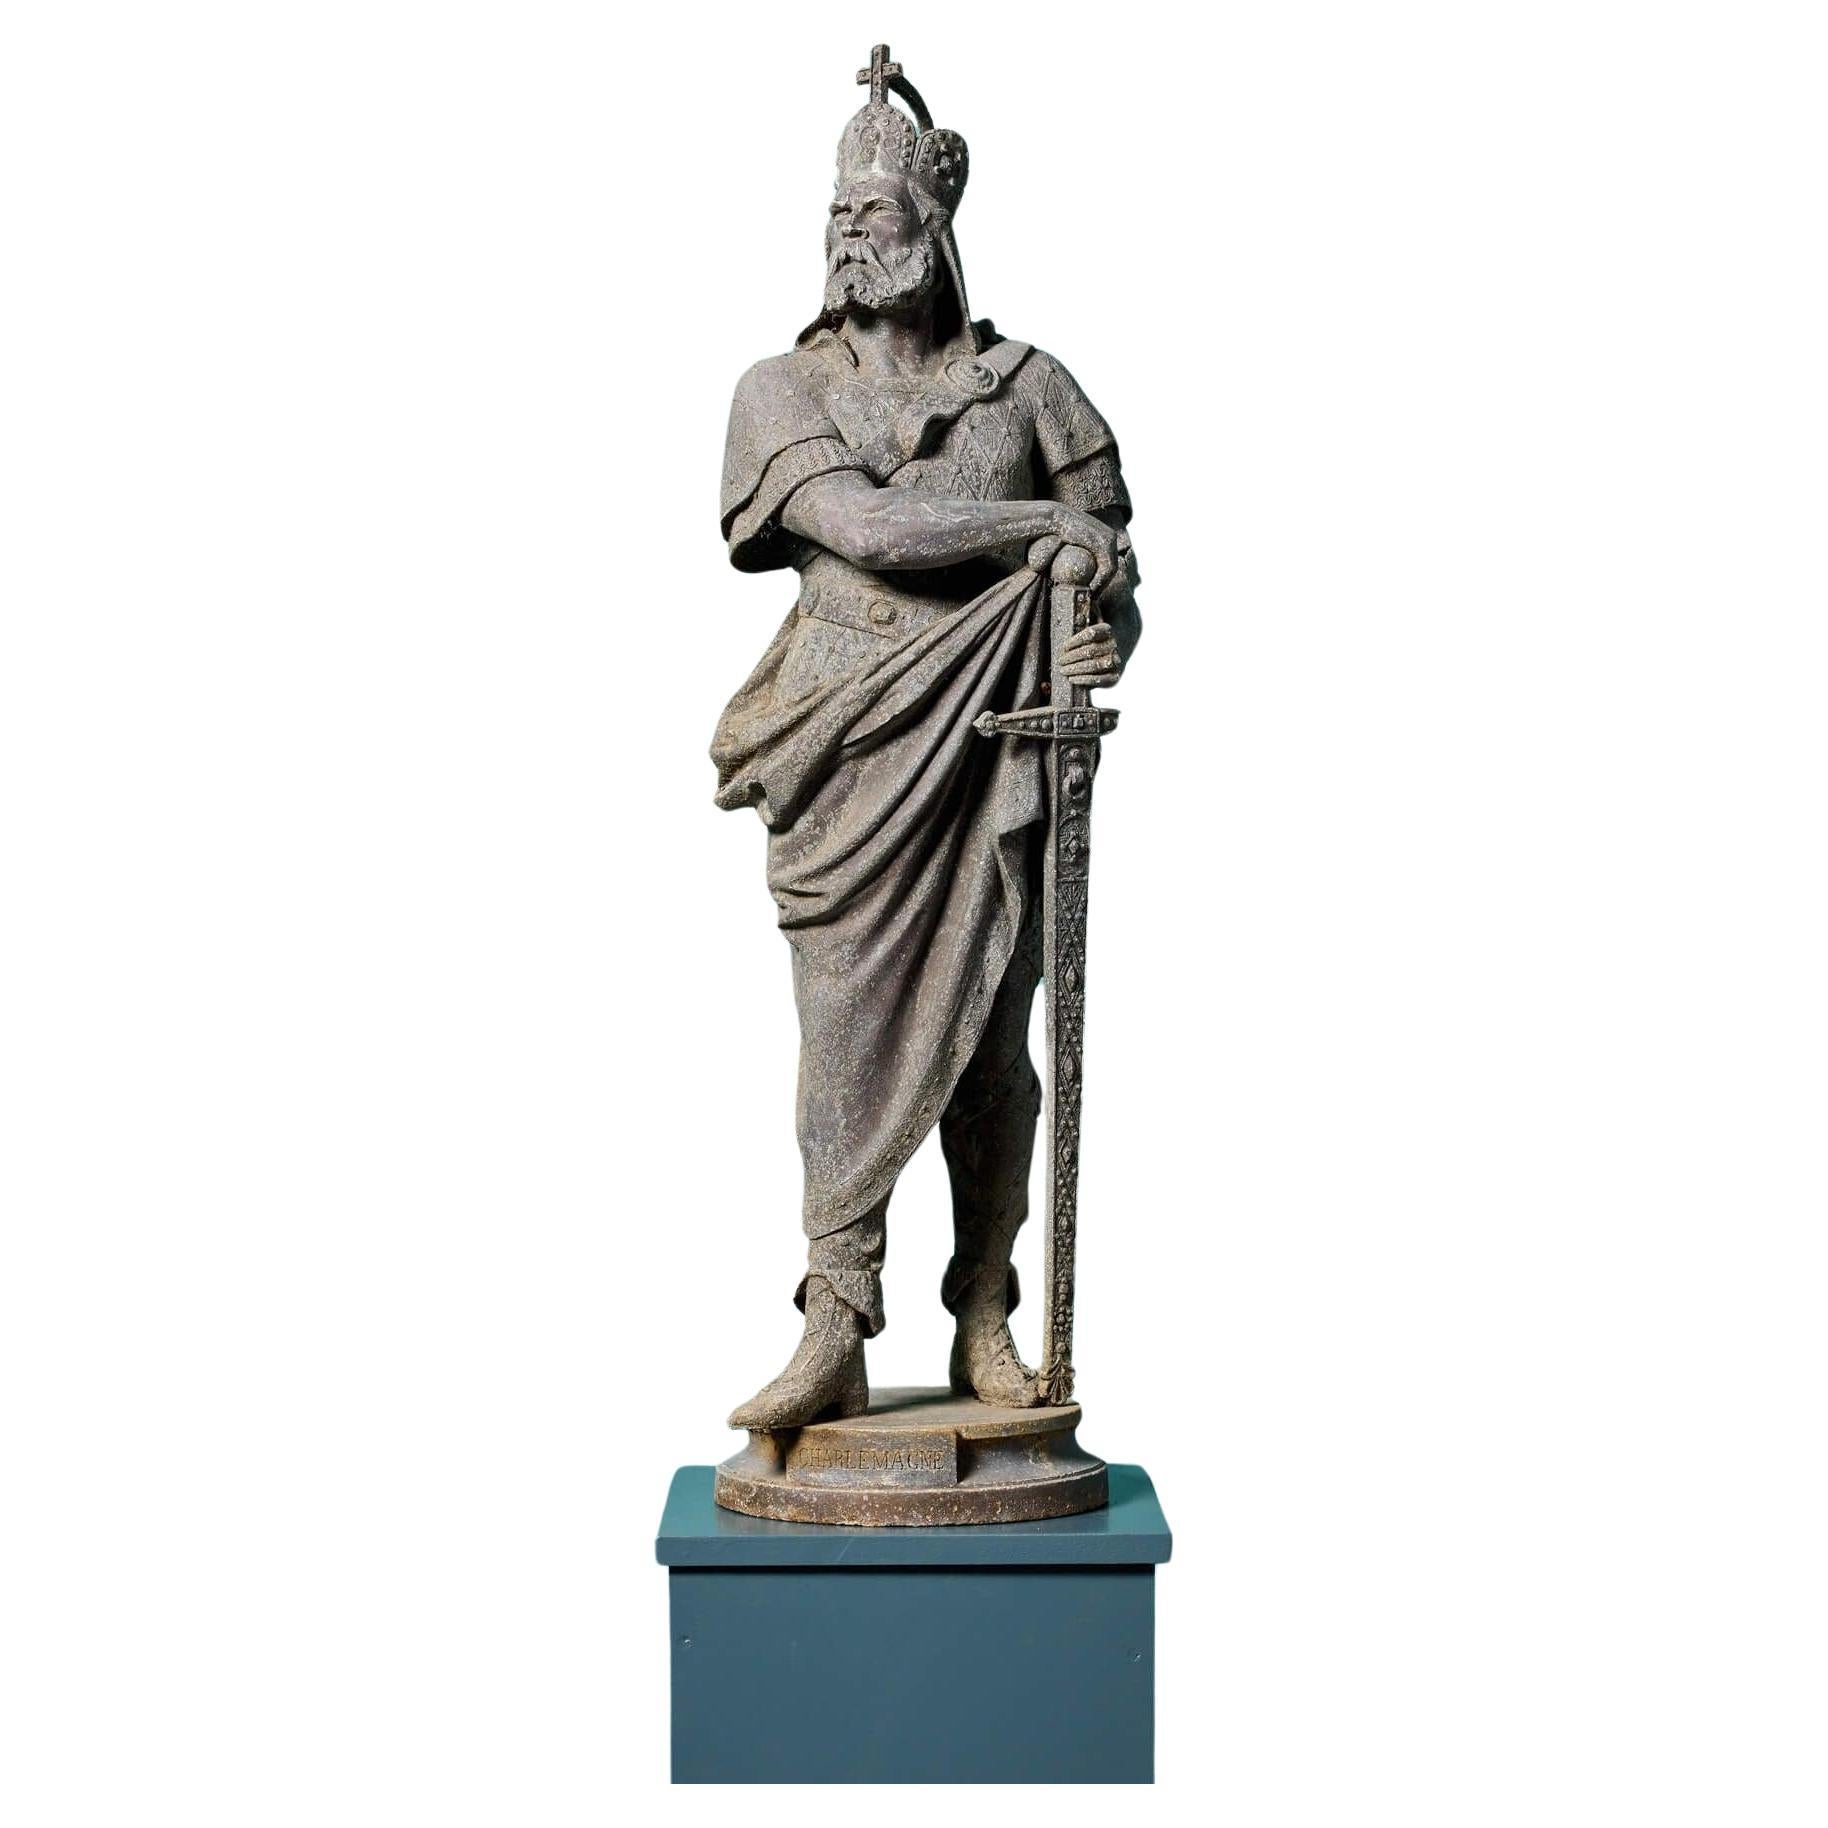 Antique Garden Statue of Charlemagne (Charles the Great) For Sale